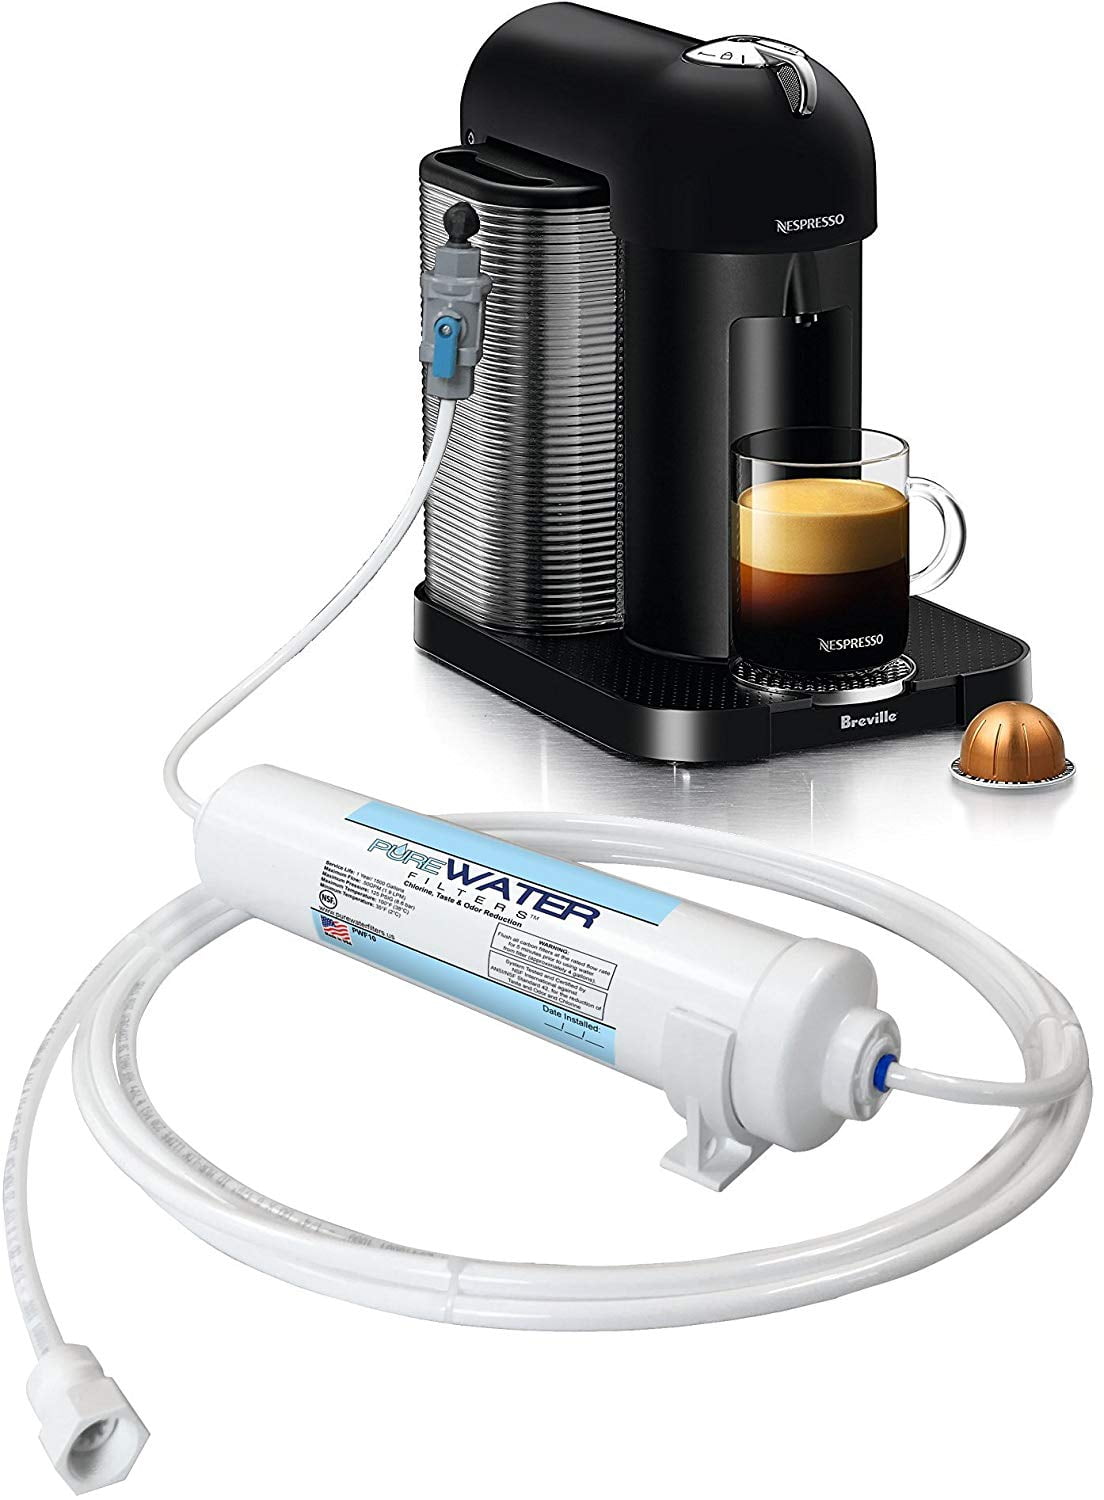 Inline Water Filter Kit for Nespresso Coffee Brewers 